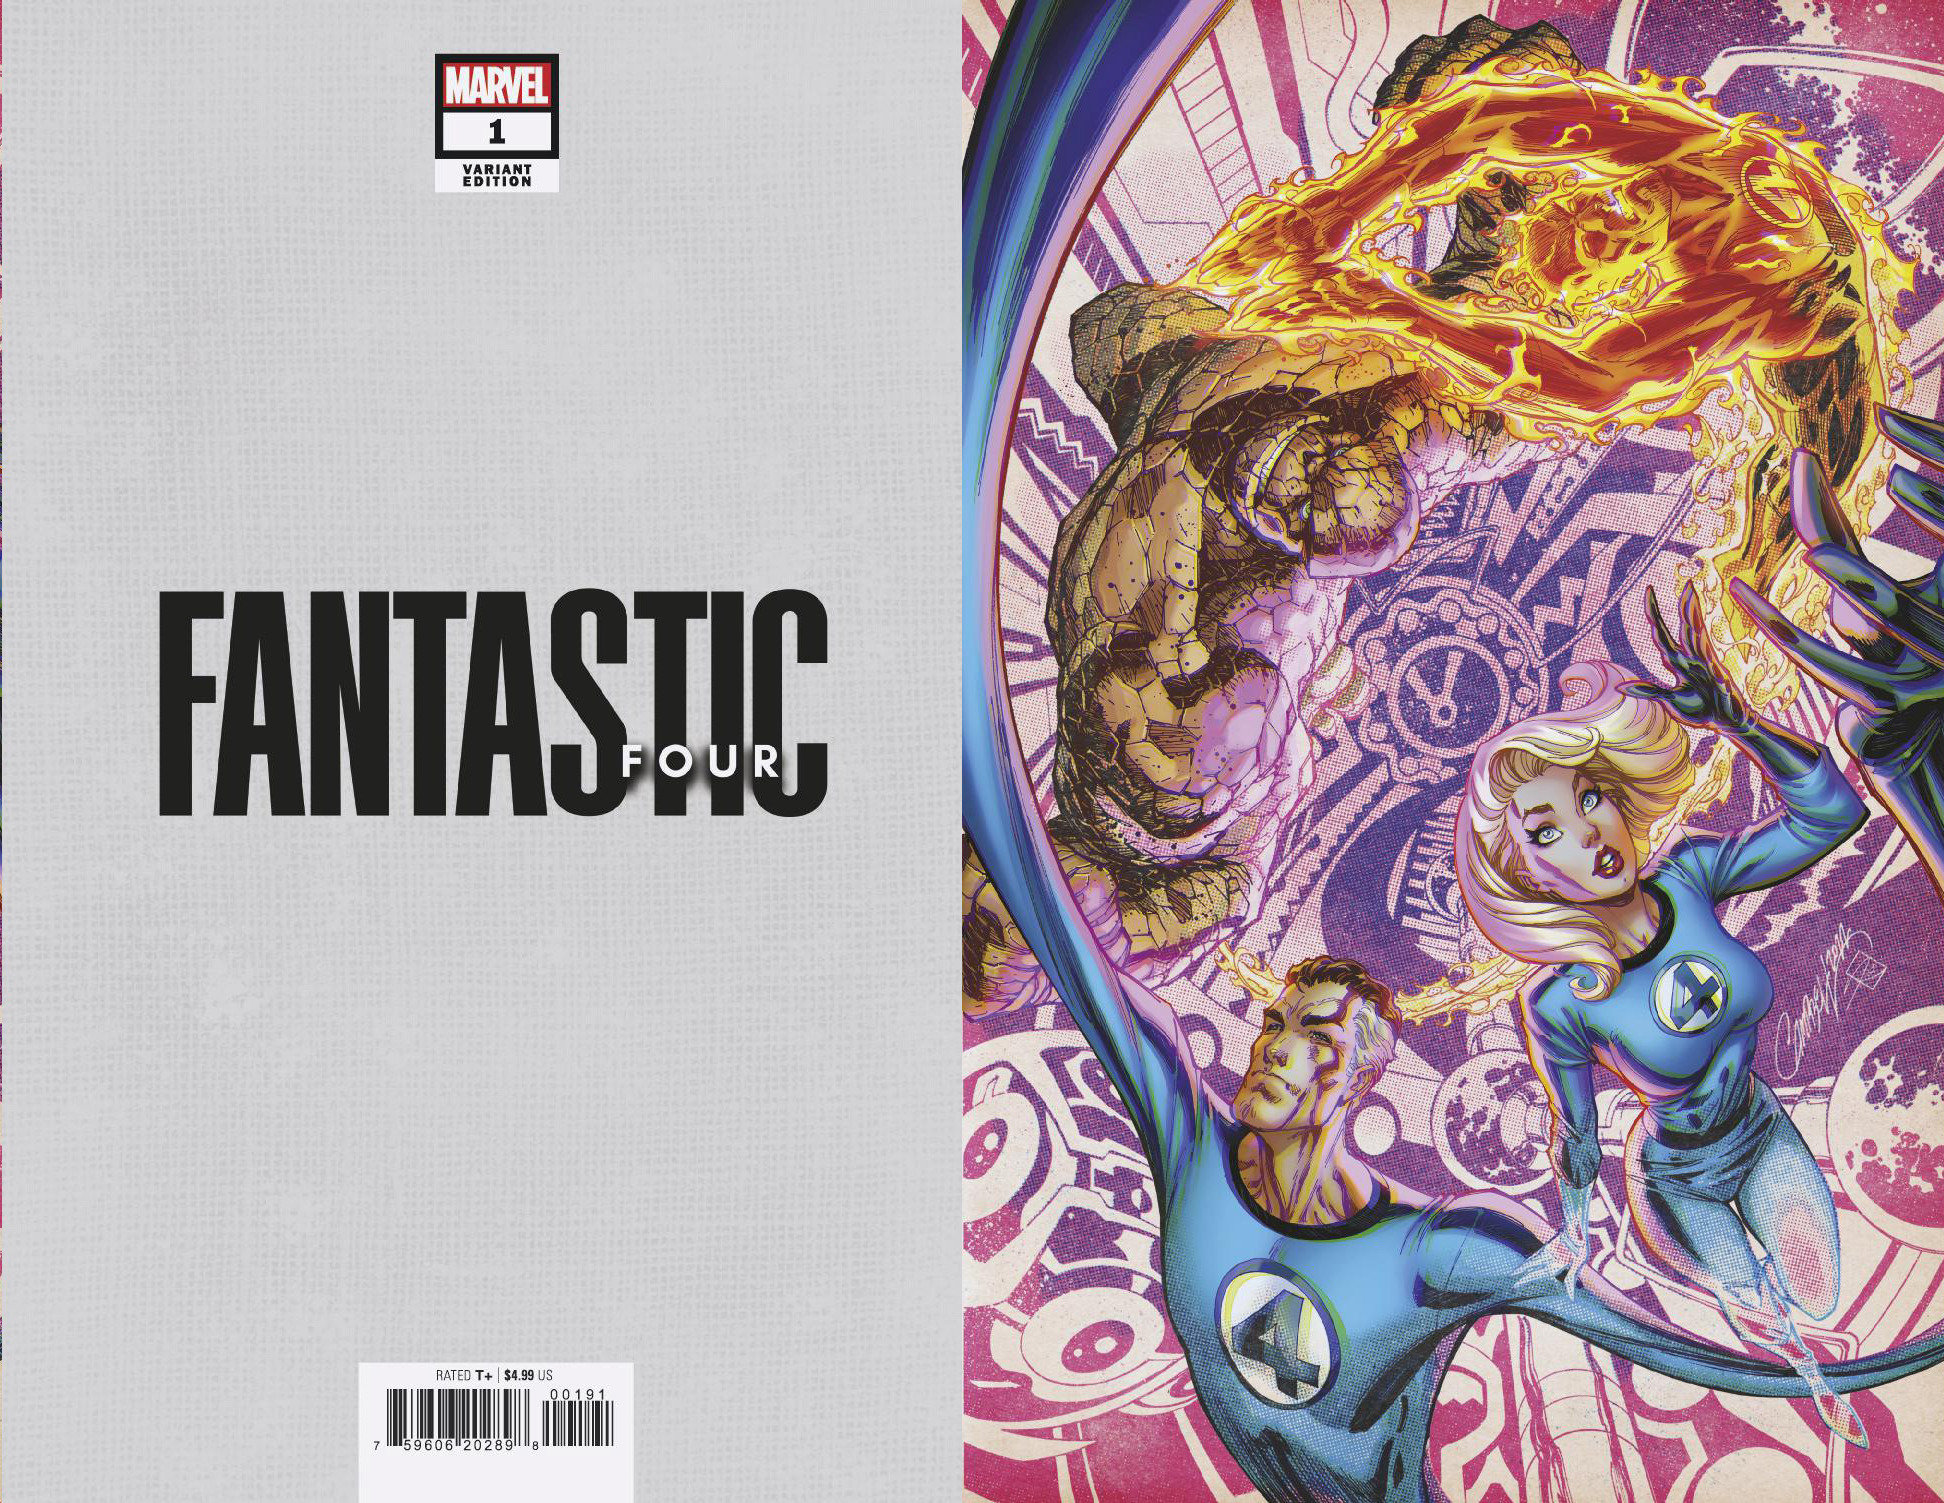 Fantastic Four #1 1 for 100 Incentive JS Campbell Virgin Anniversary Variant (2022)